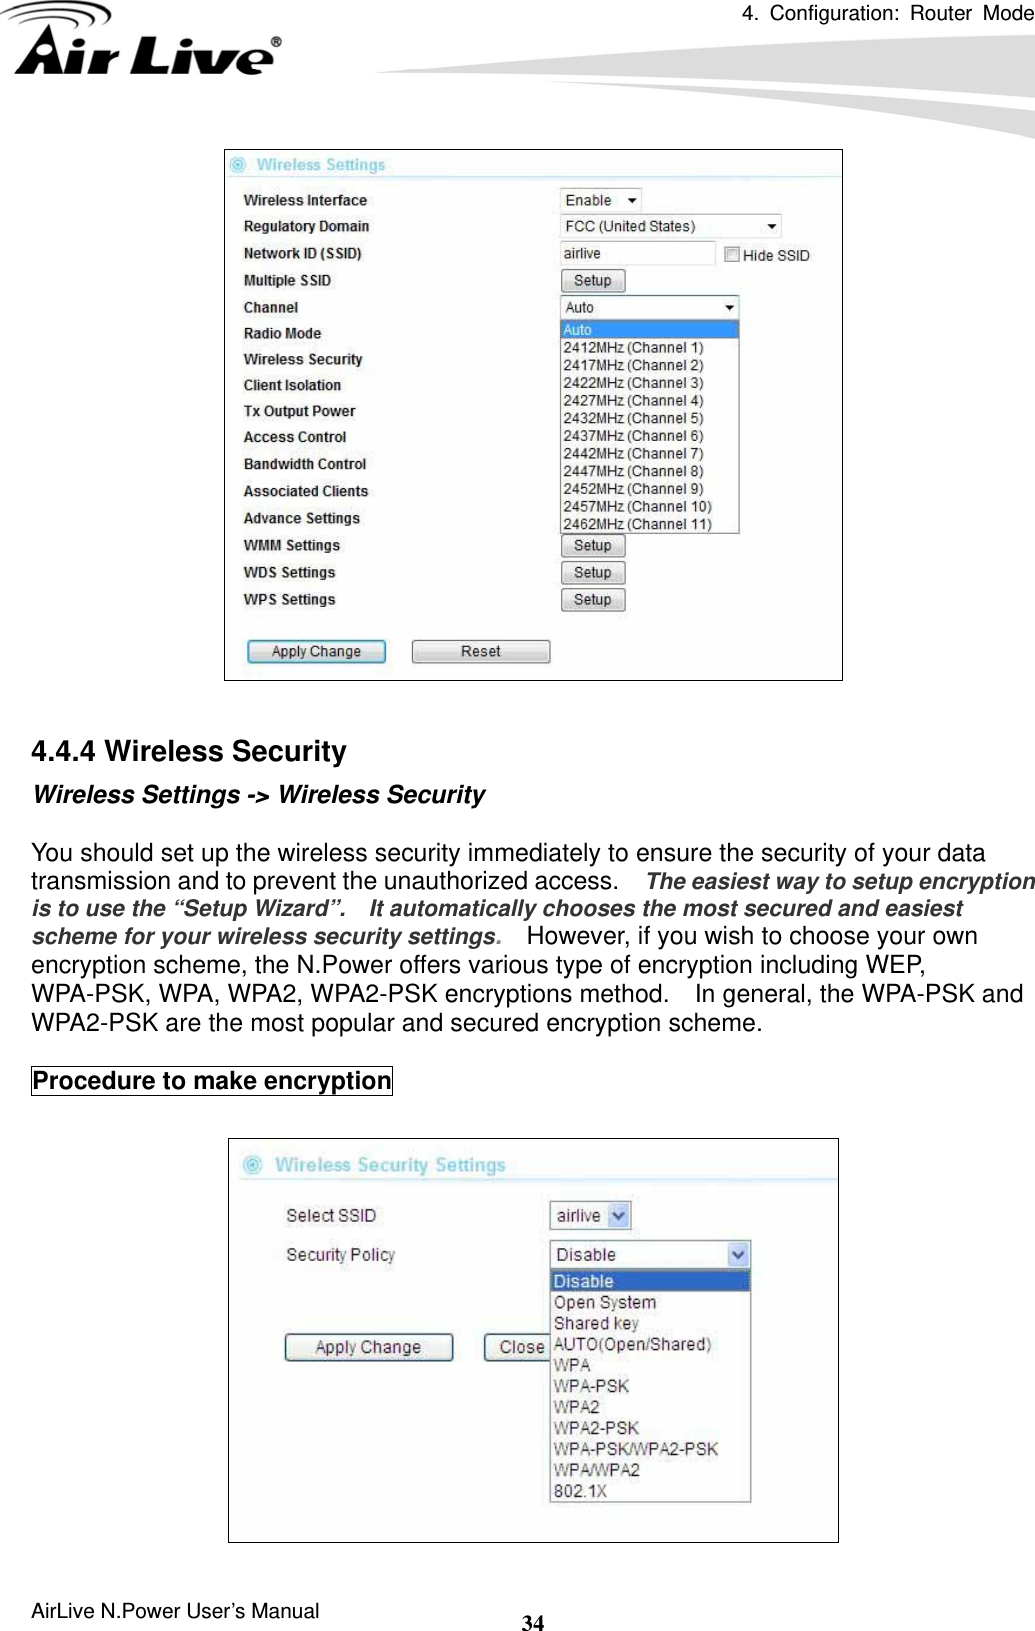 4. Configuration: Router Mode  AirLive N.Power User’s Manual  34  4.4.4 Wireless Security Wireless Settings -&gt; Wireless Security  You should set up the wireless security immediately to ensure the security of your data transmission and to prevent the unauthorized access.    The easiest way to setup encryption is to use the “Setup Wizard”.    It automatically chooses the most secured and easiest scheme for your wireless security settings.    However, if you wish to choose your own encryption scheme, the N.Power offers various type of encryption including WEP, WPA-PSK, WPA, WPA2, WPA2-PSK encryptions method.    In general, the WPA-PSK and WPA2-PSK are the most popular and secured encryption scheme.  Procedure to make encryption   